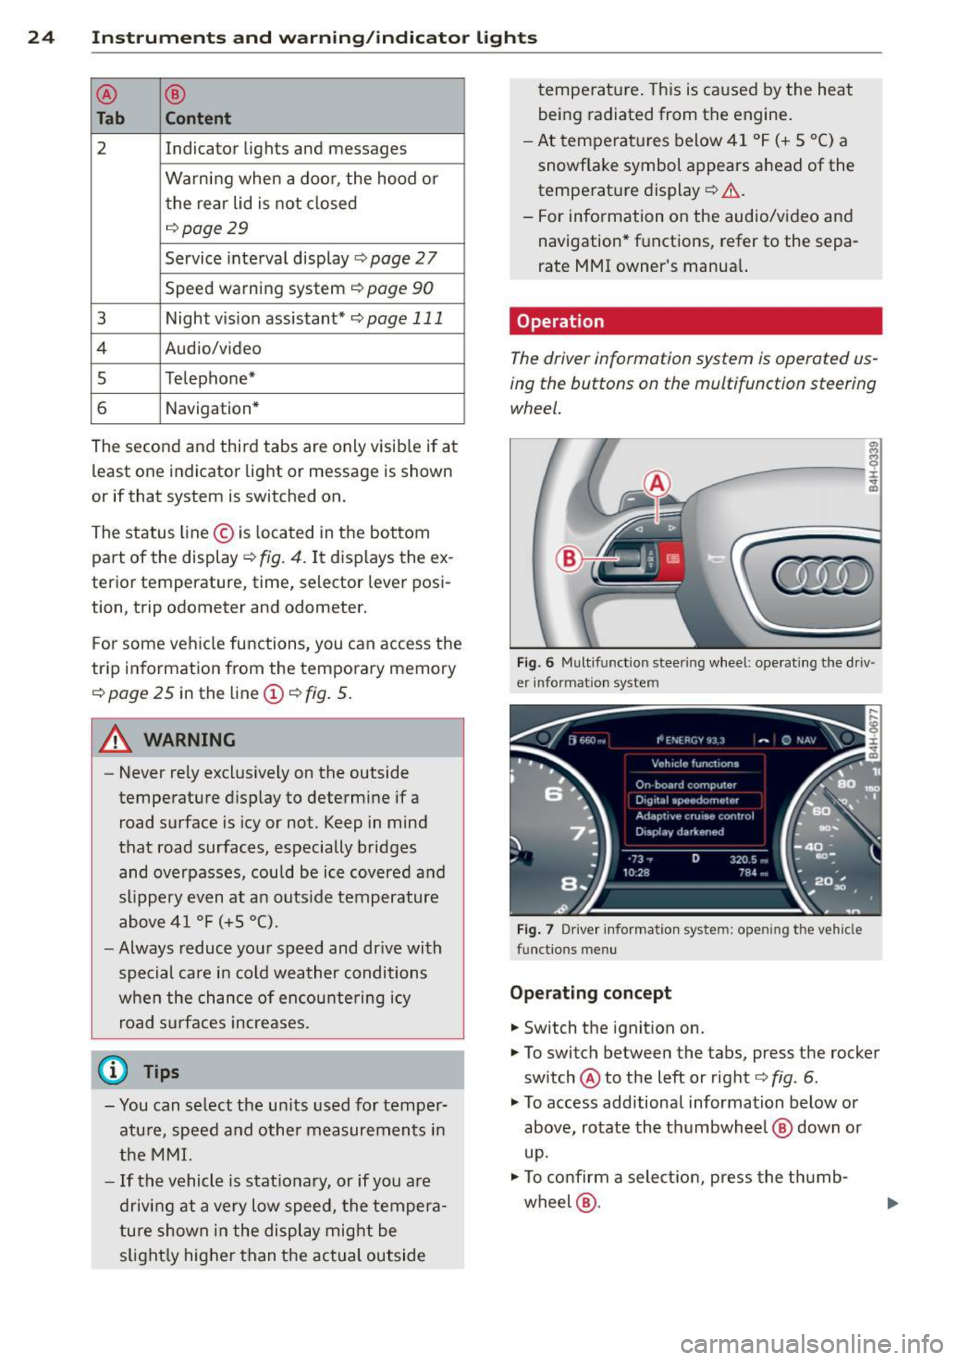 AUDI S8 2015  Owners Manual 24  Instruments  and  warning/indicator  lights 
® ® 
Tab  Content 
2 Indicator lights and  messages 
Warning  when  a  door,  the  hood  or  the  rear  lid is  not  closed 
c:::>page29 
Service  in